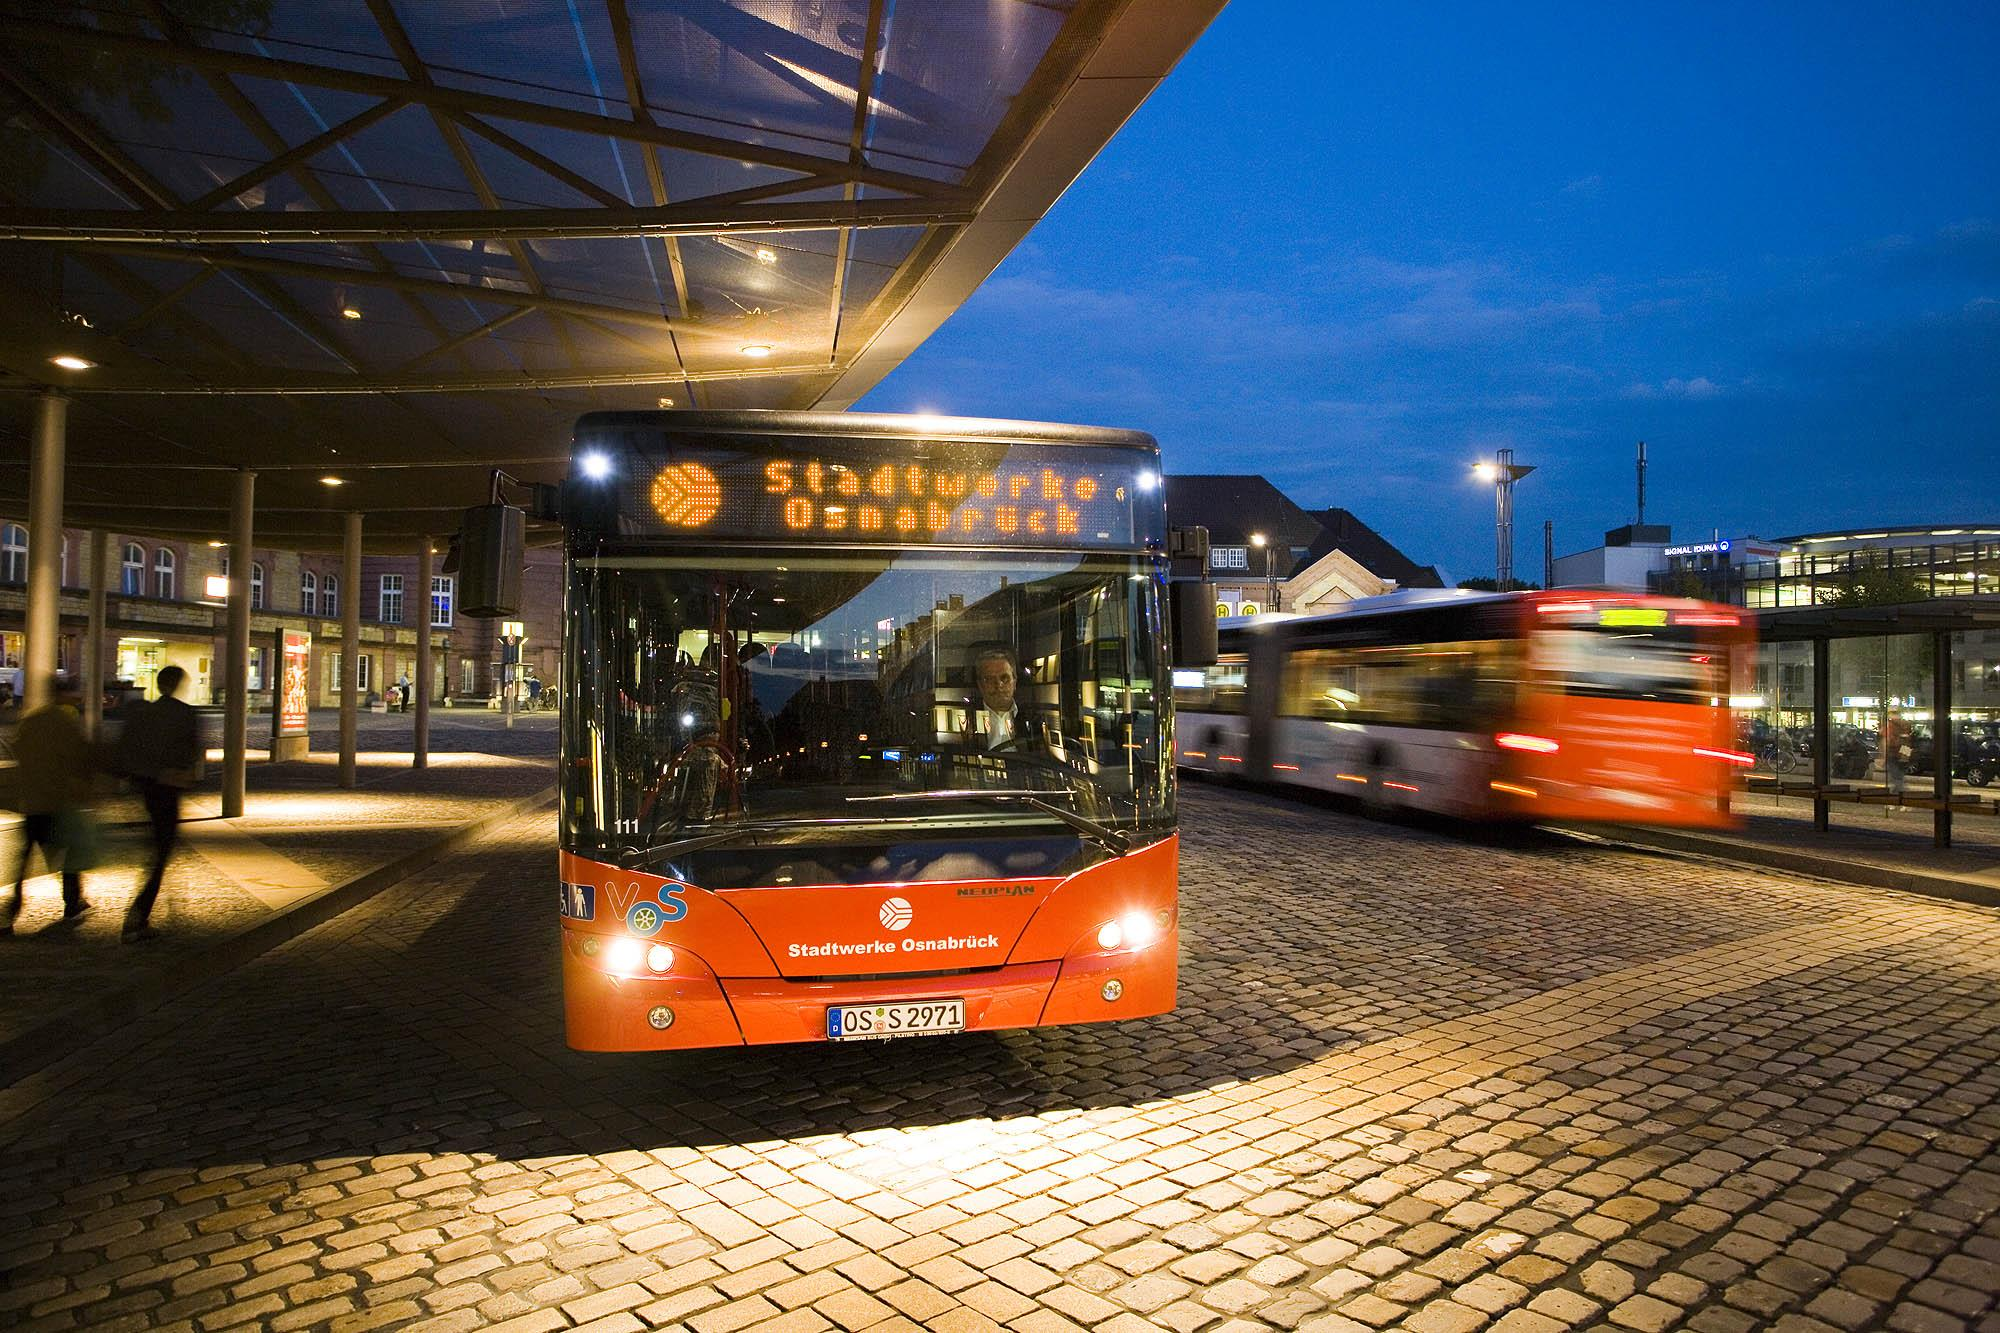 Battery buses and plug-in technology: The capacities of